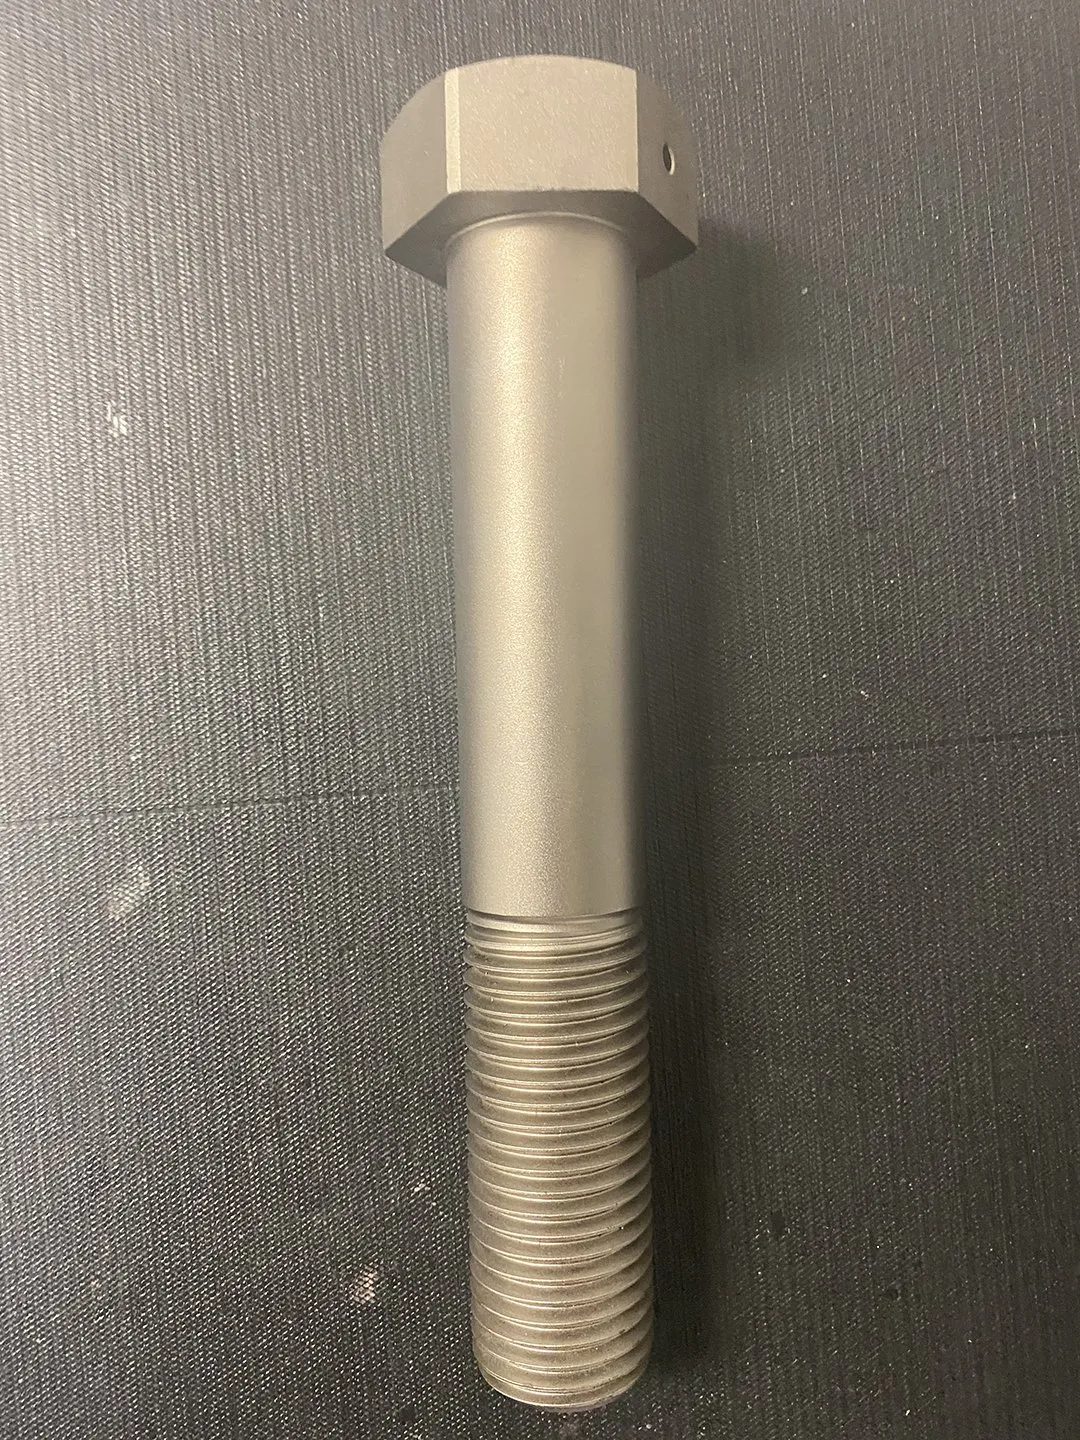 Example of a hex head bolt with rolled thread ends